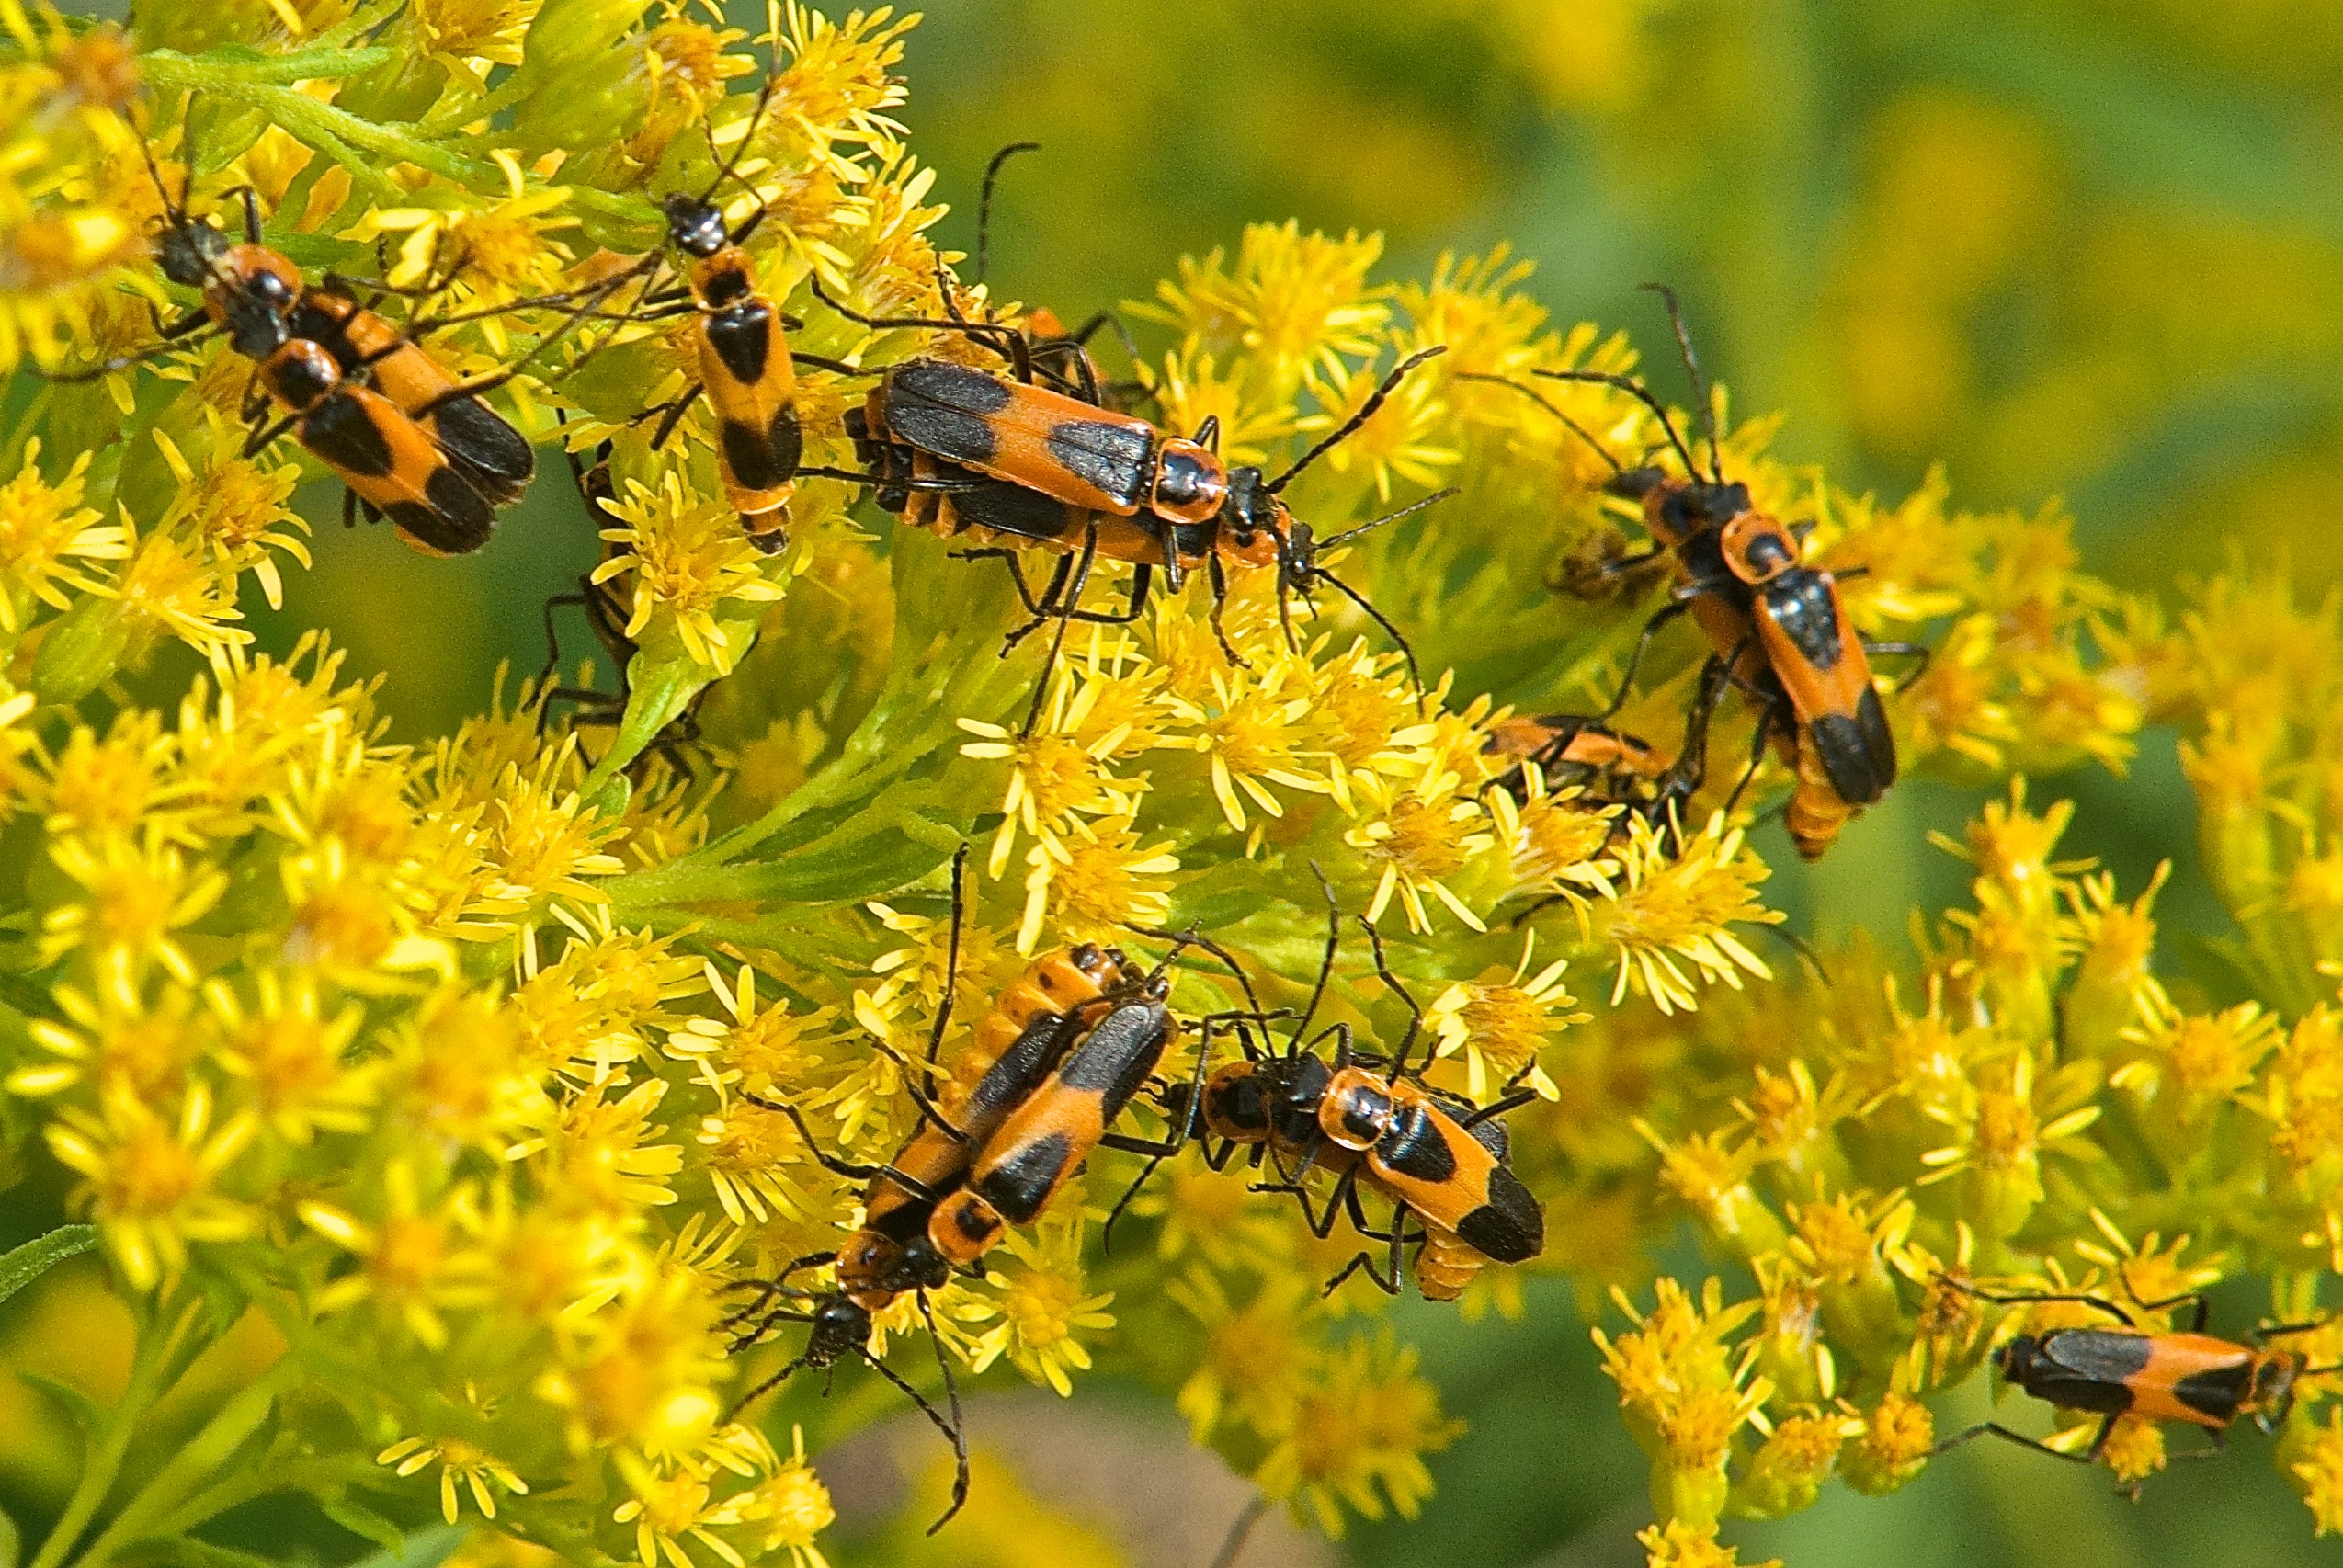 Goldenrod Soldier Beetles on Canada Goldenrod (Solidago canadensis)